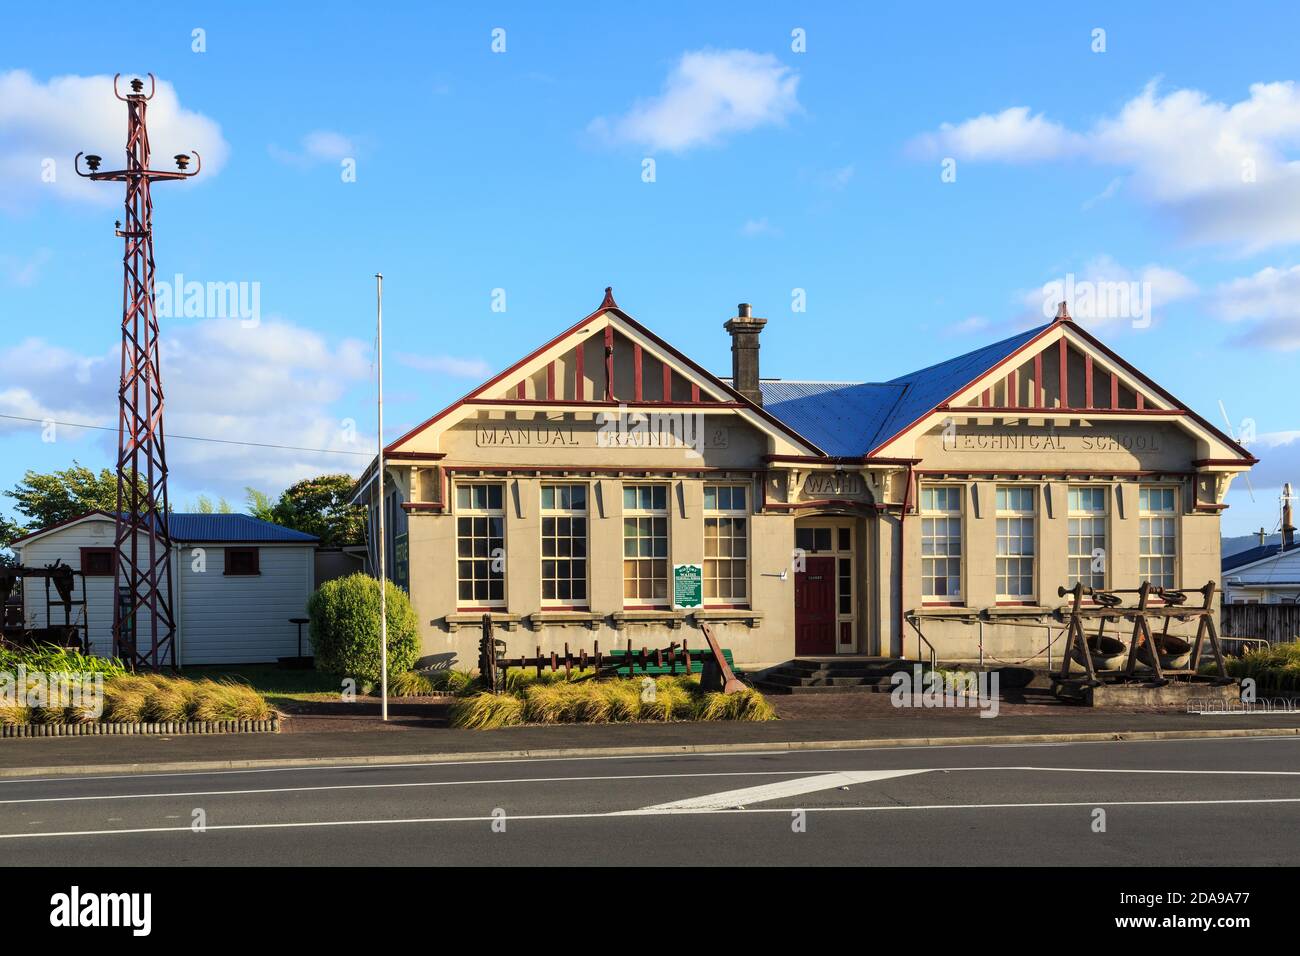 The old Manual Training and Technical School building (built 1913) in Waihi, New Zealand. It now houses an arts center and museum. Stock Photo